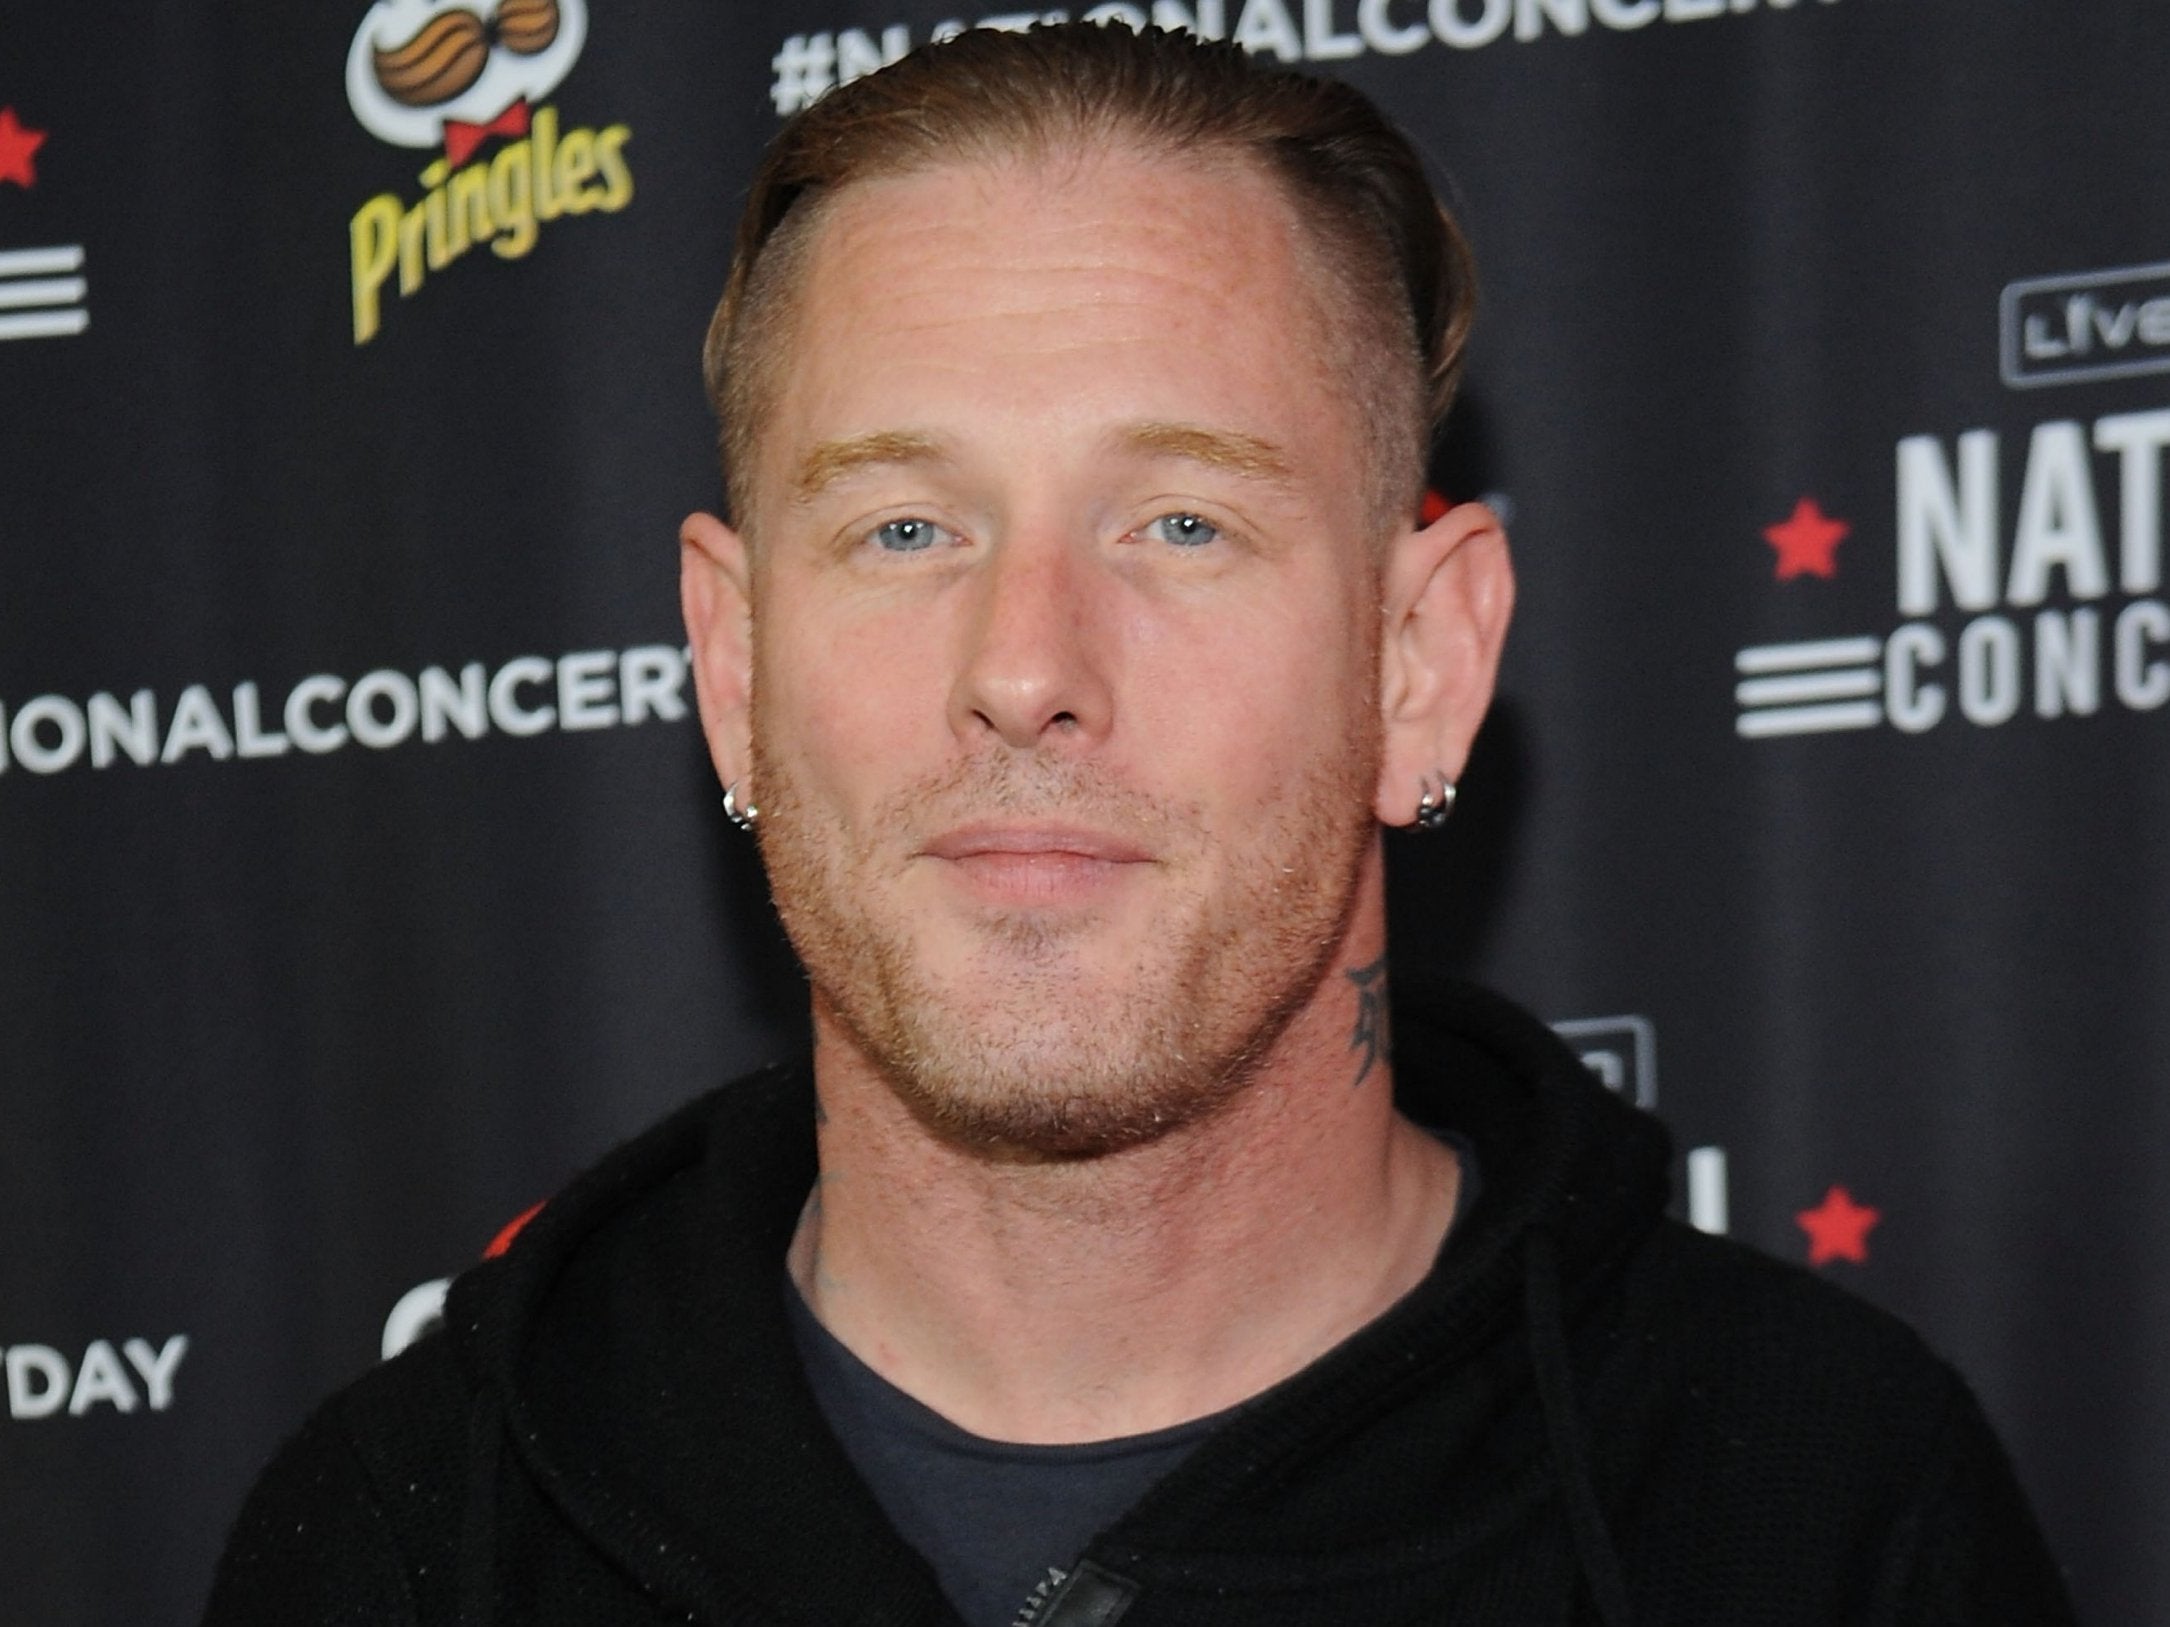 Behind the mask: Slipknot frontman Corey Taylor (Getty)